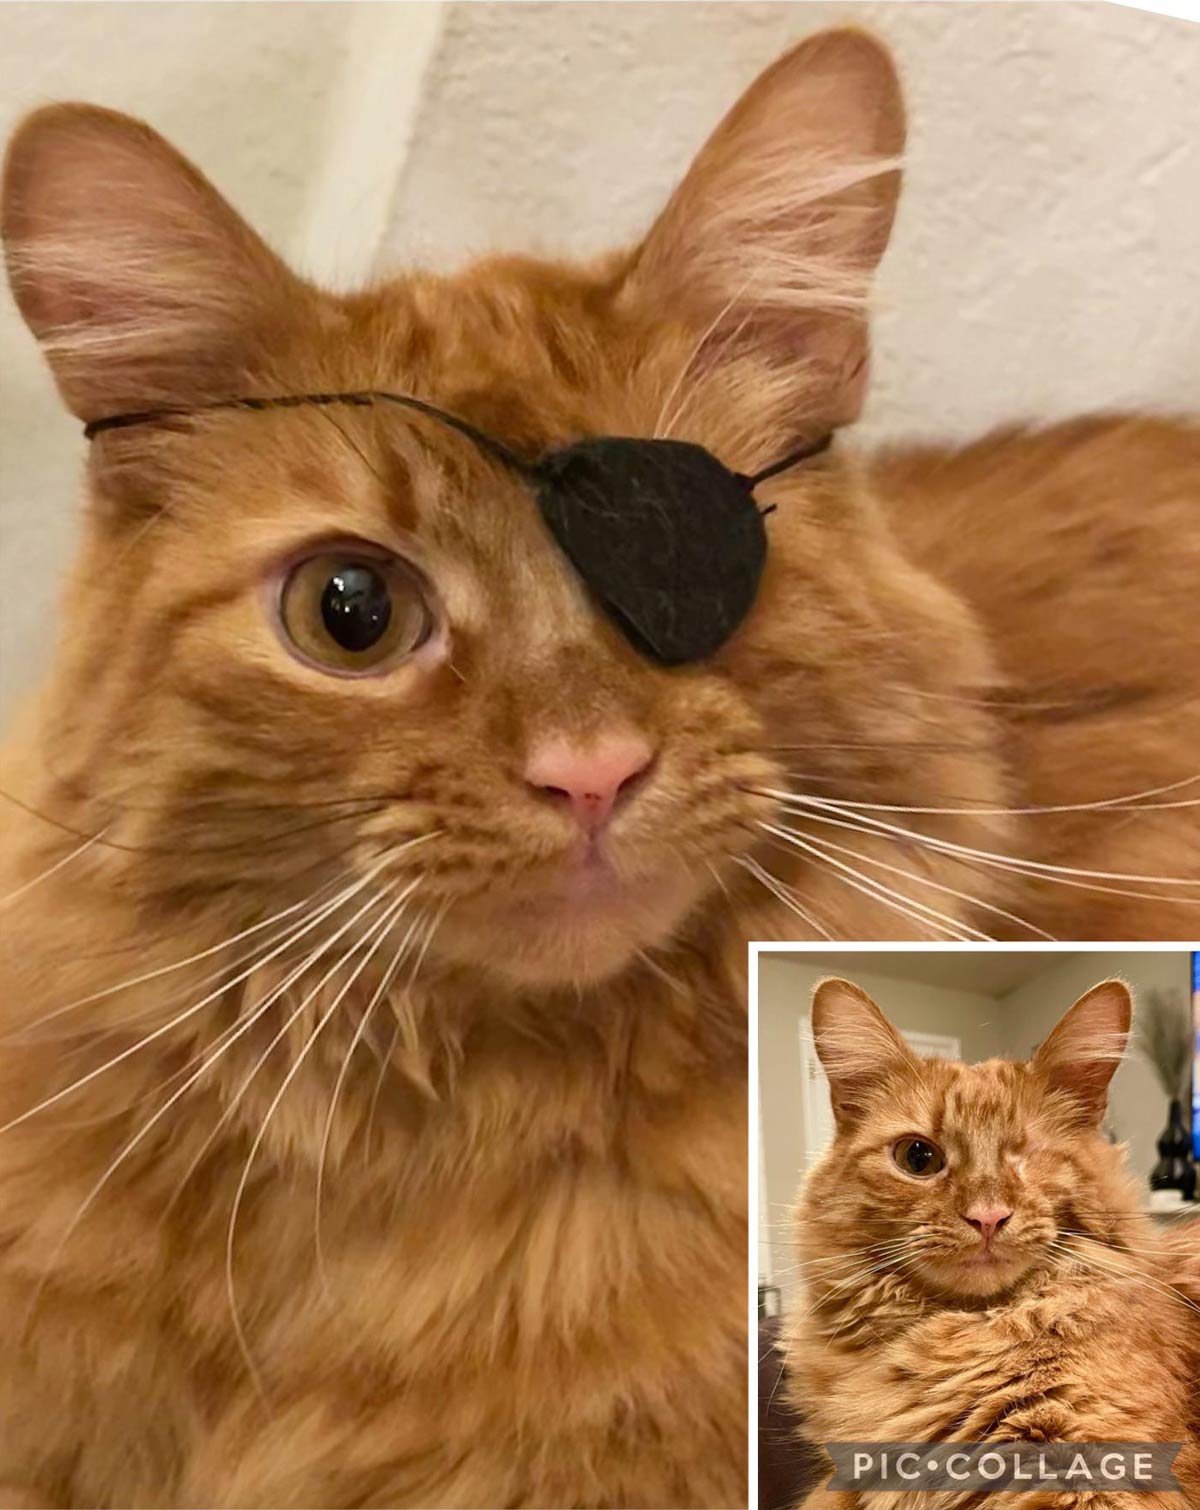 I made my cat an eye patch and he rocked it